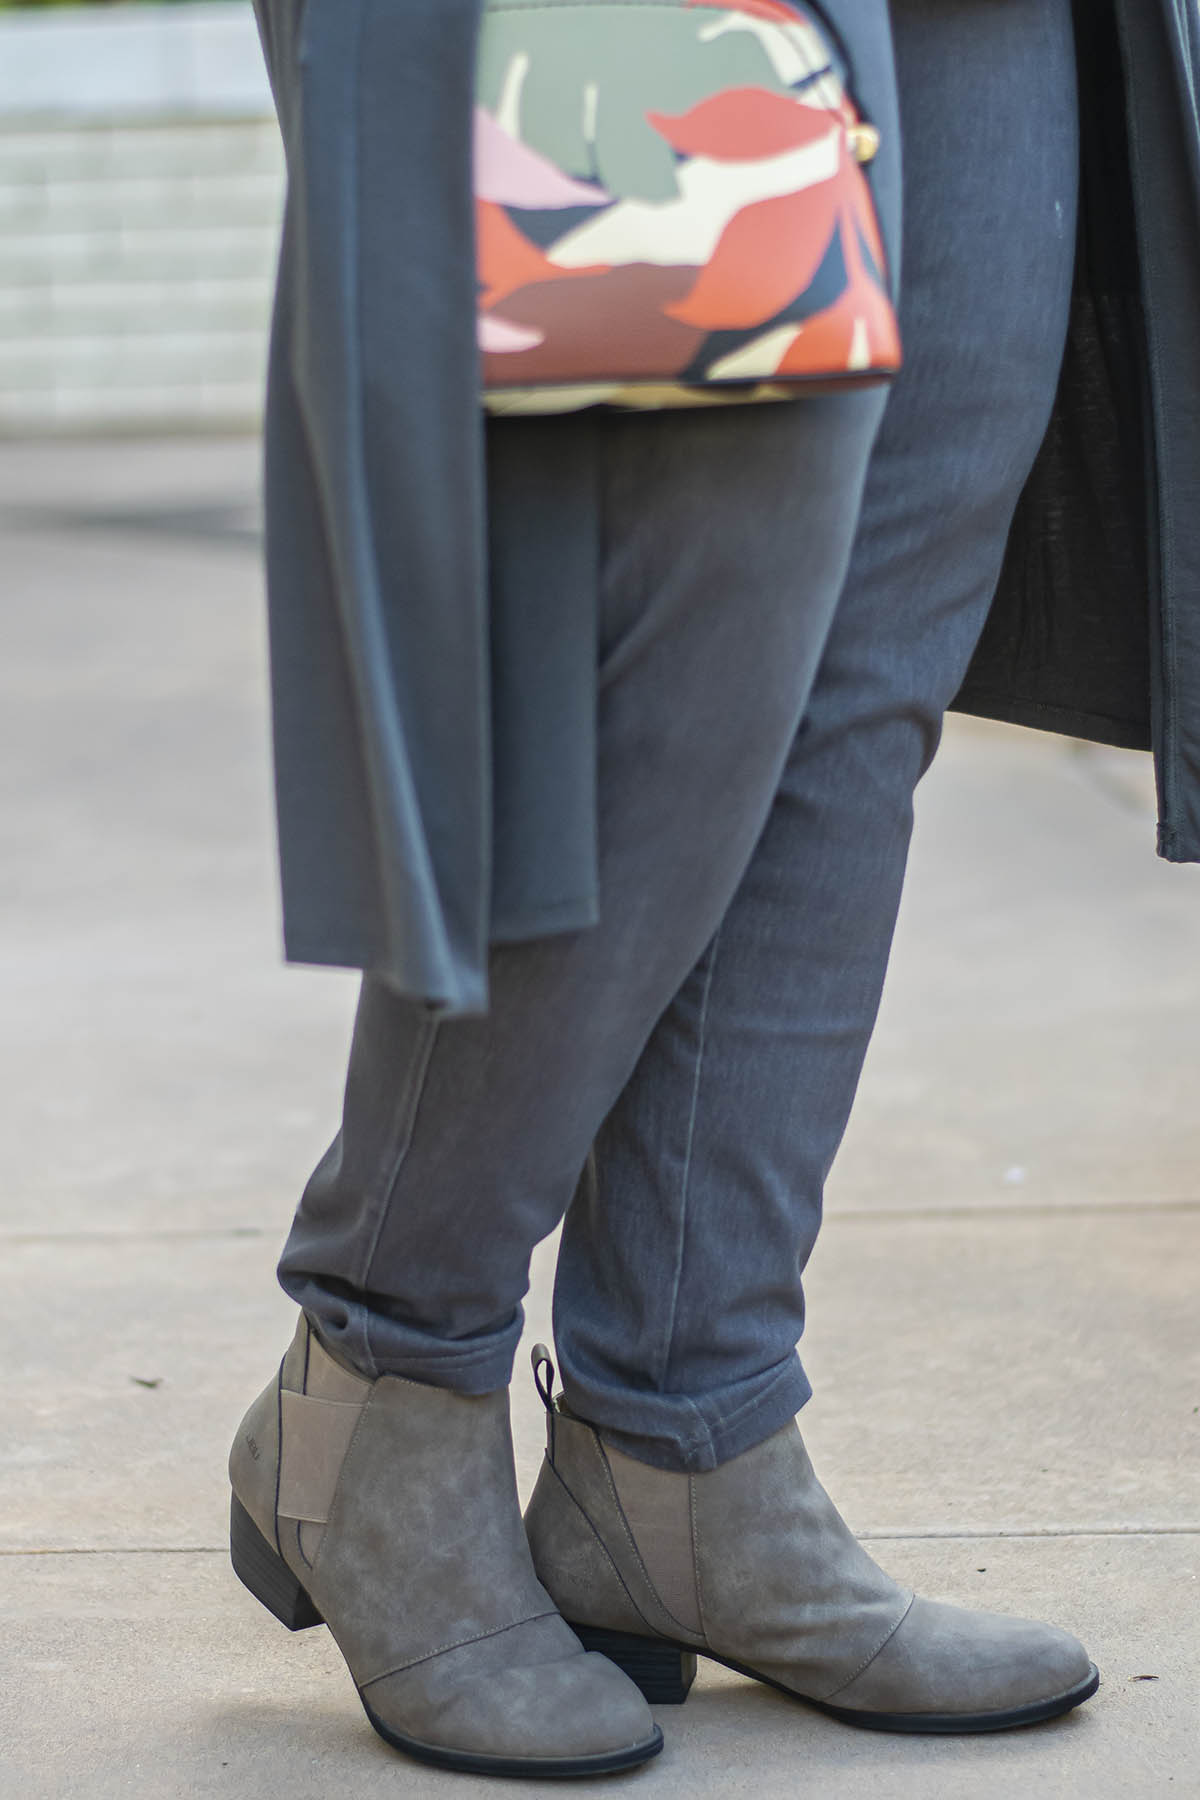 Grey jeans and booties